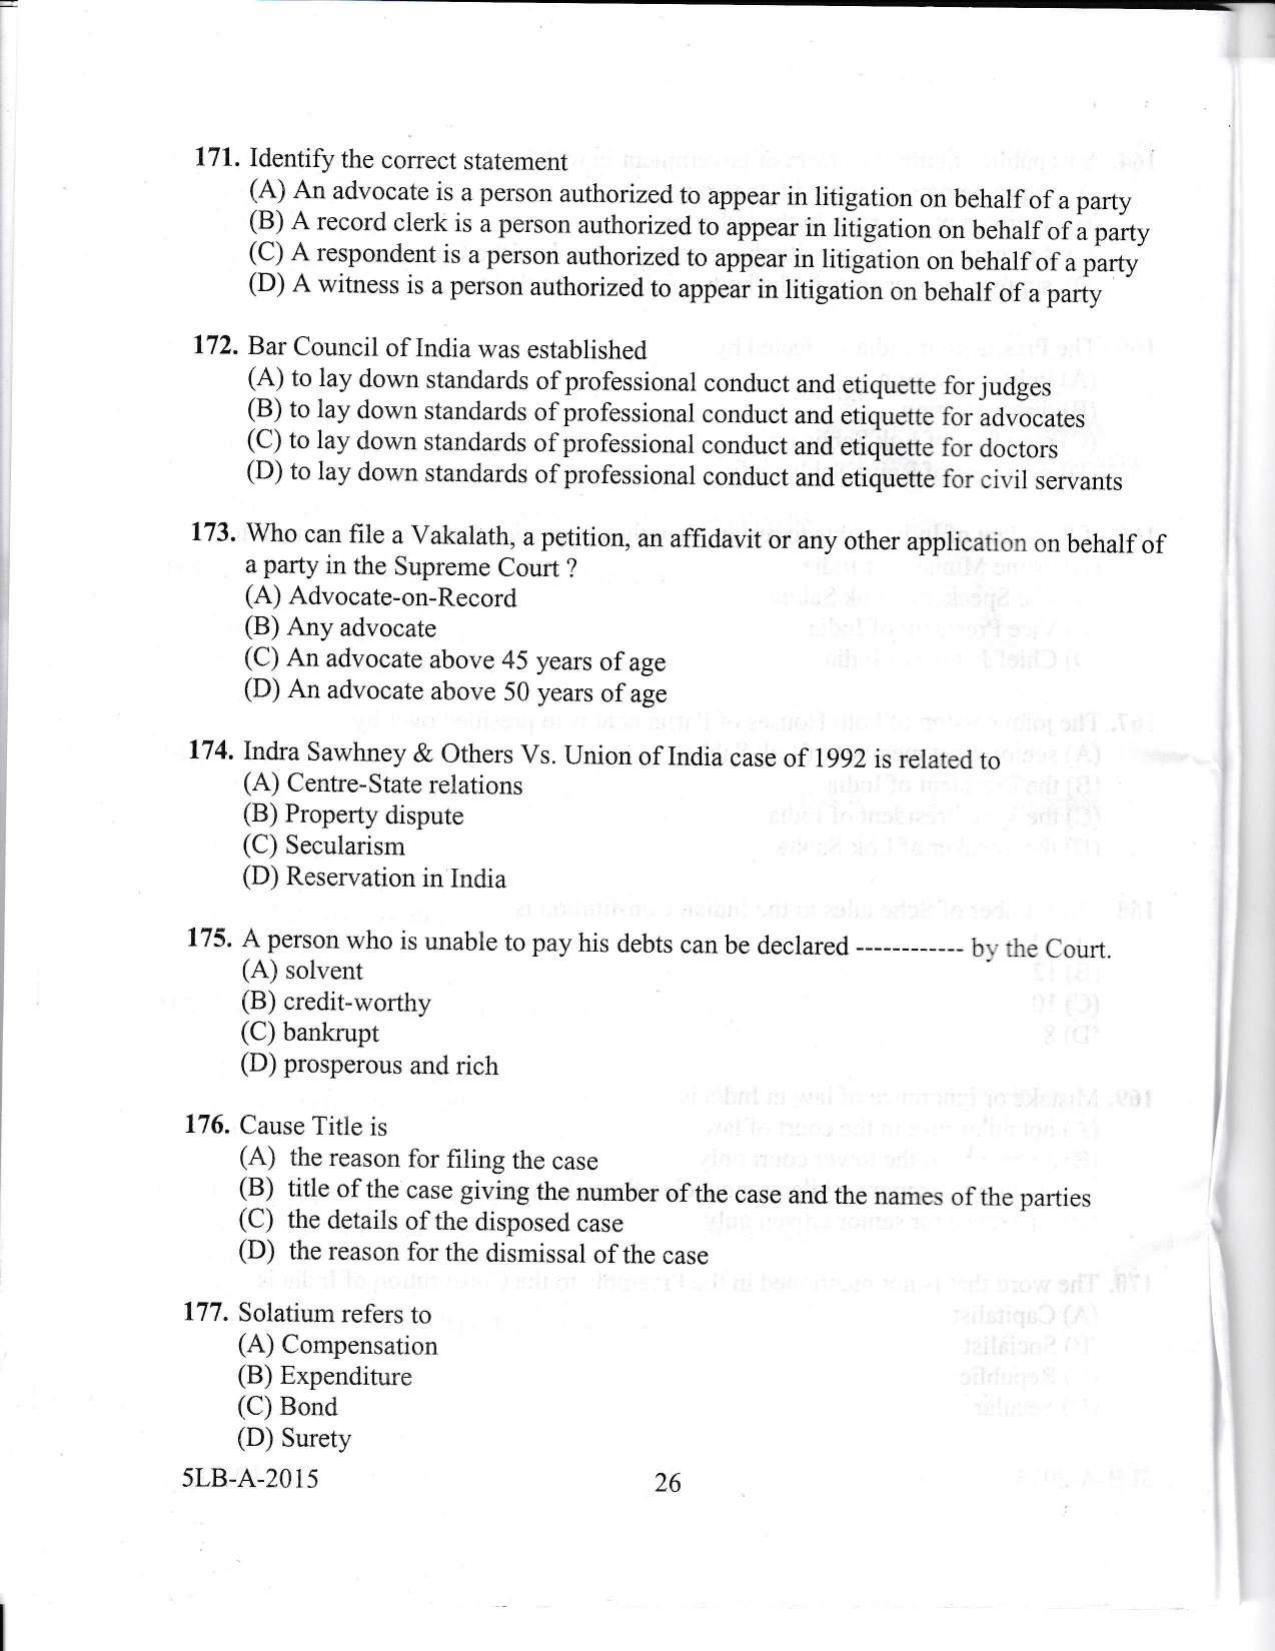 KLEE 5 Year LLB Exam 2015 Question Paper - Page 26